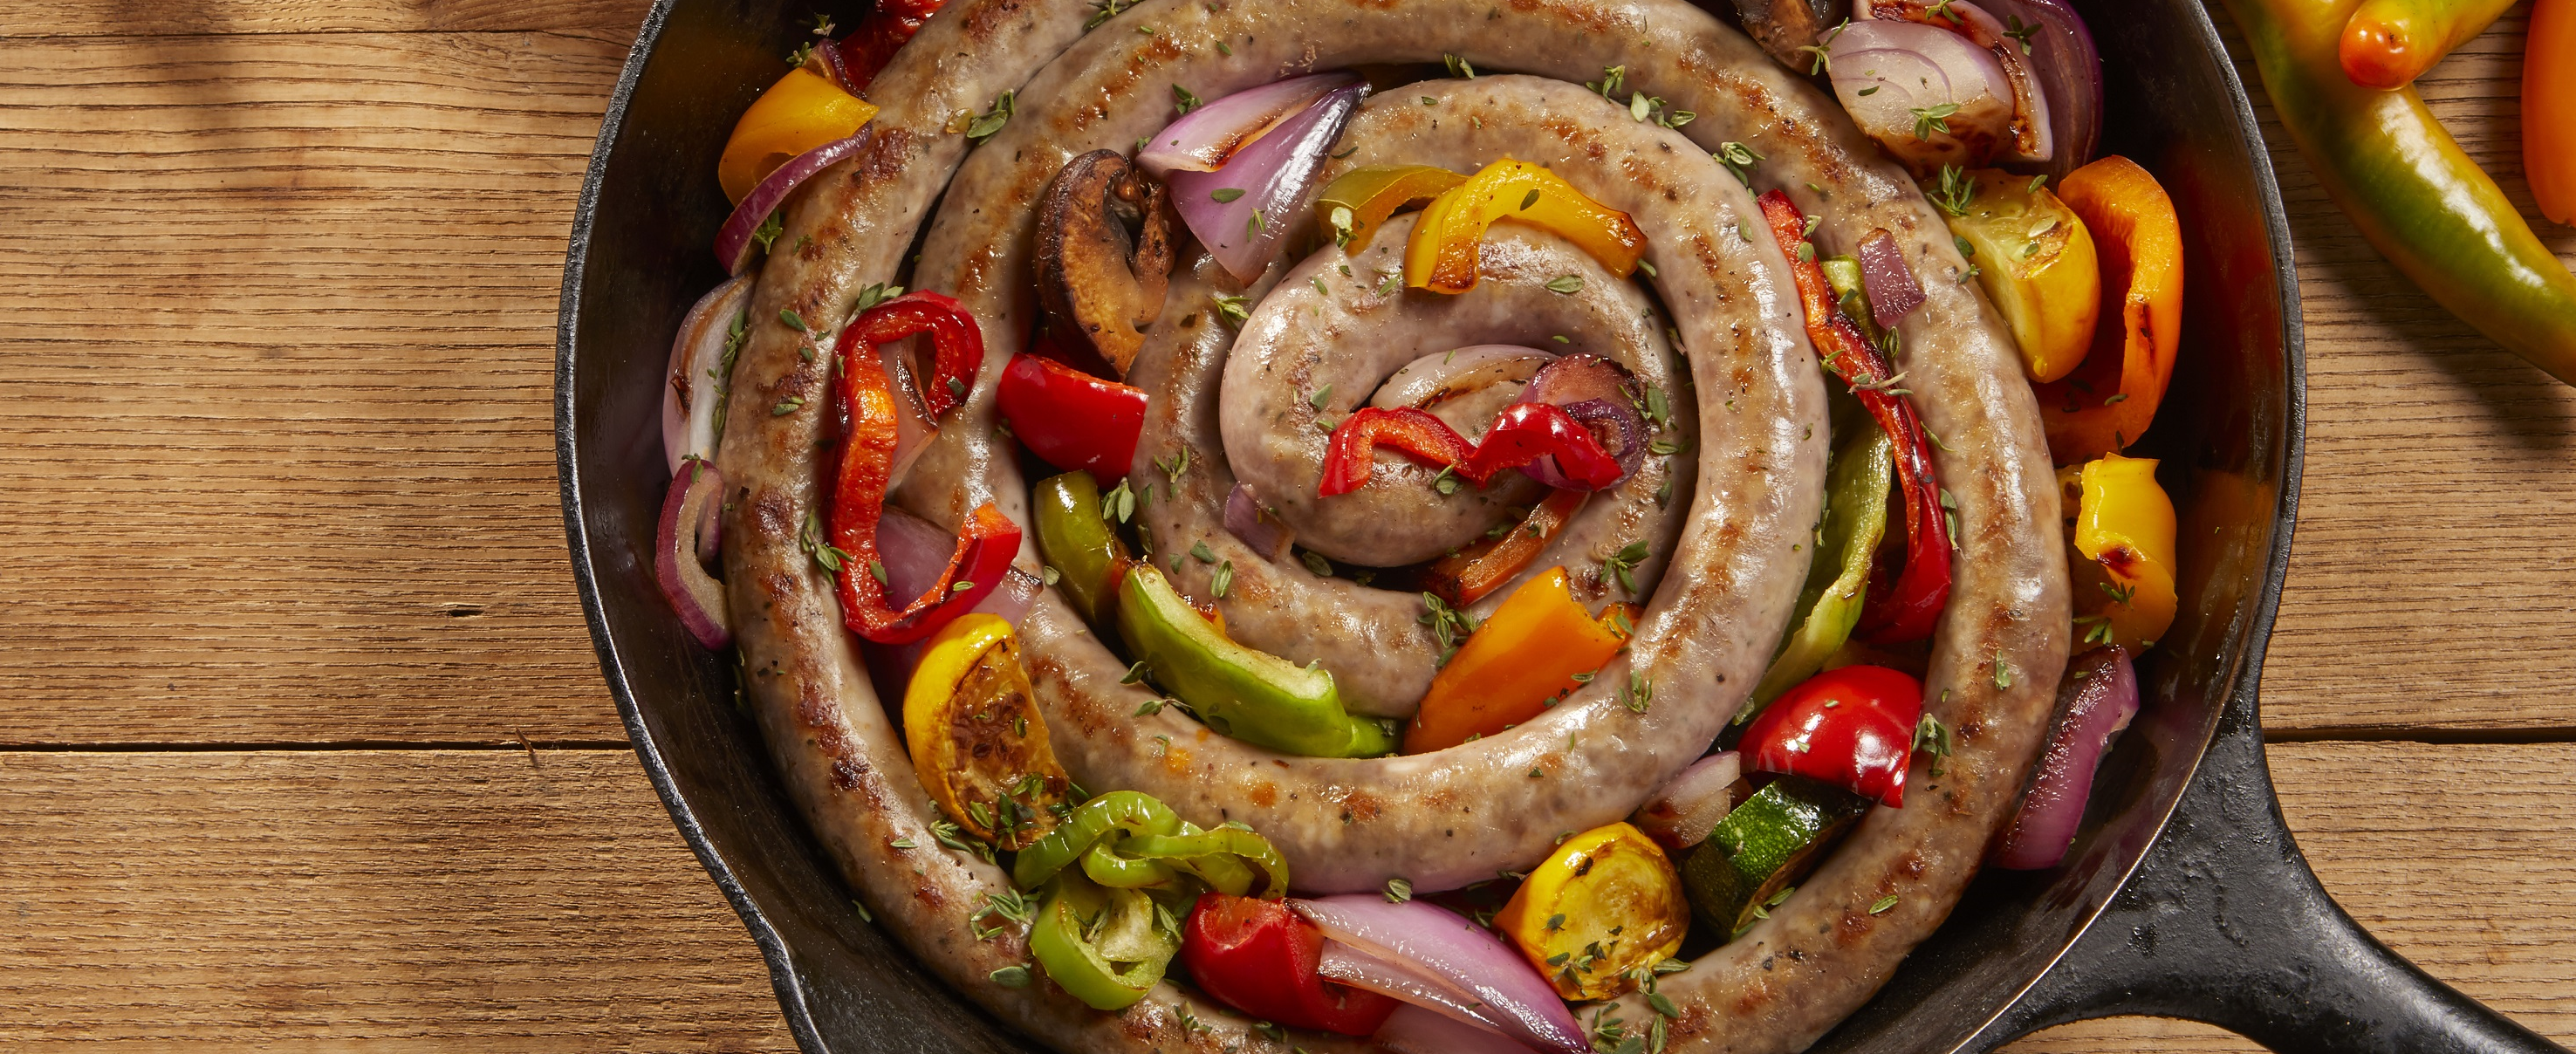 https://www.premiofoods.com/content/uploads/2017/09/cooking-sausage-101-feature-new.png